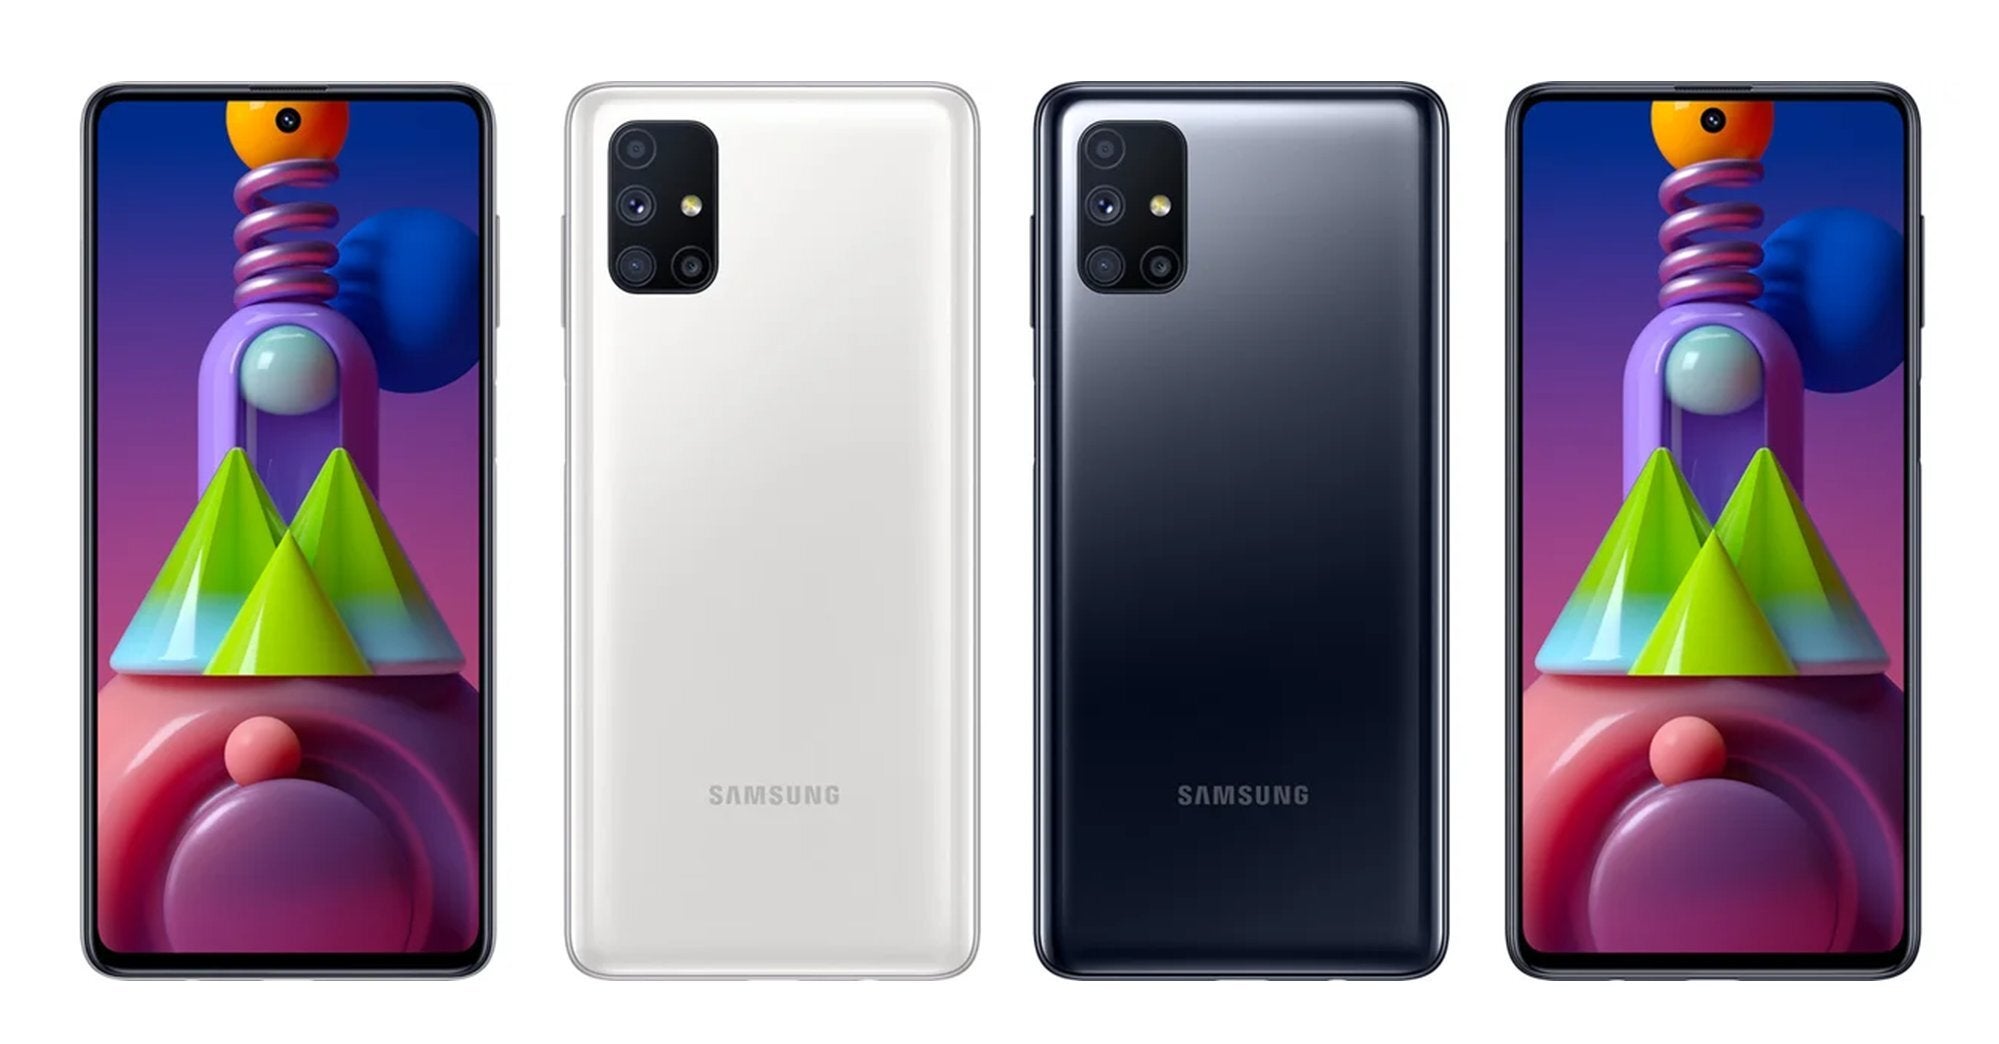 Samsung Galaxy M51 / image credits @Sudhansu1414 - Samsung Galaxy M51 tipped to pack a truly humongous battery